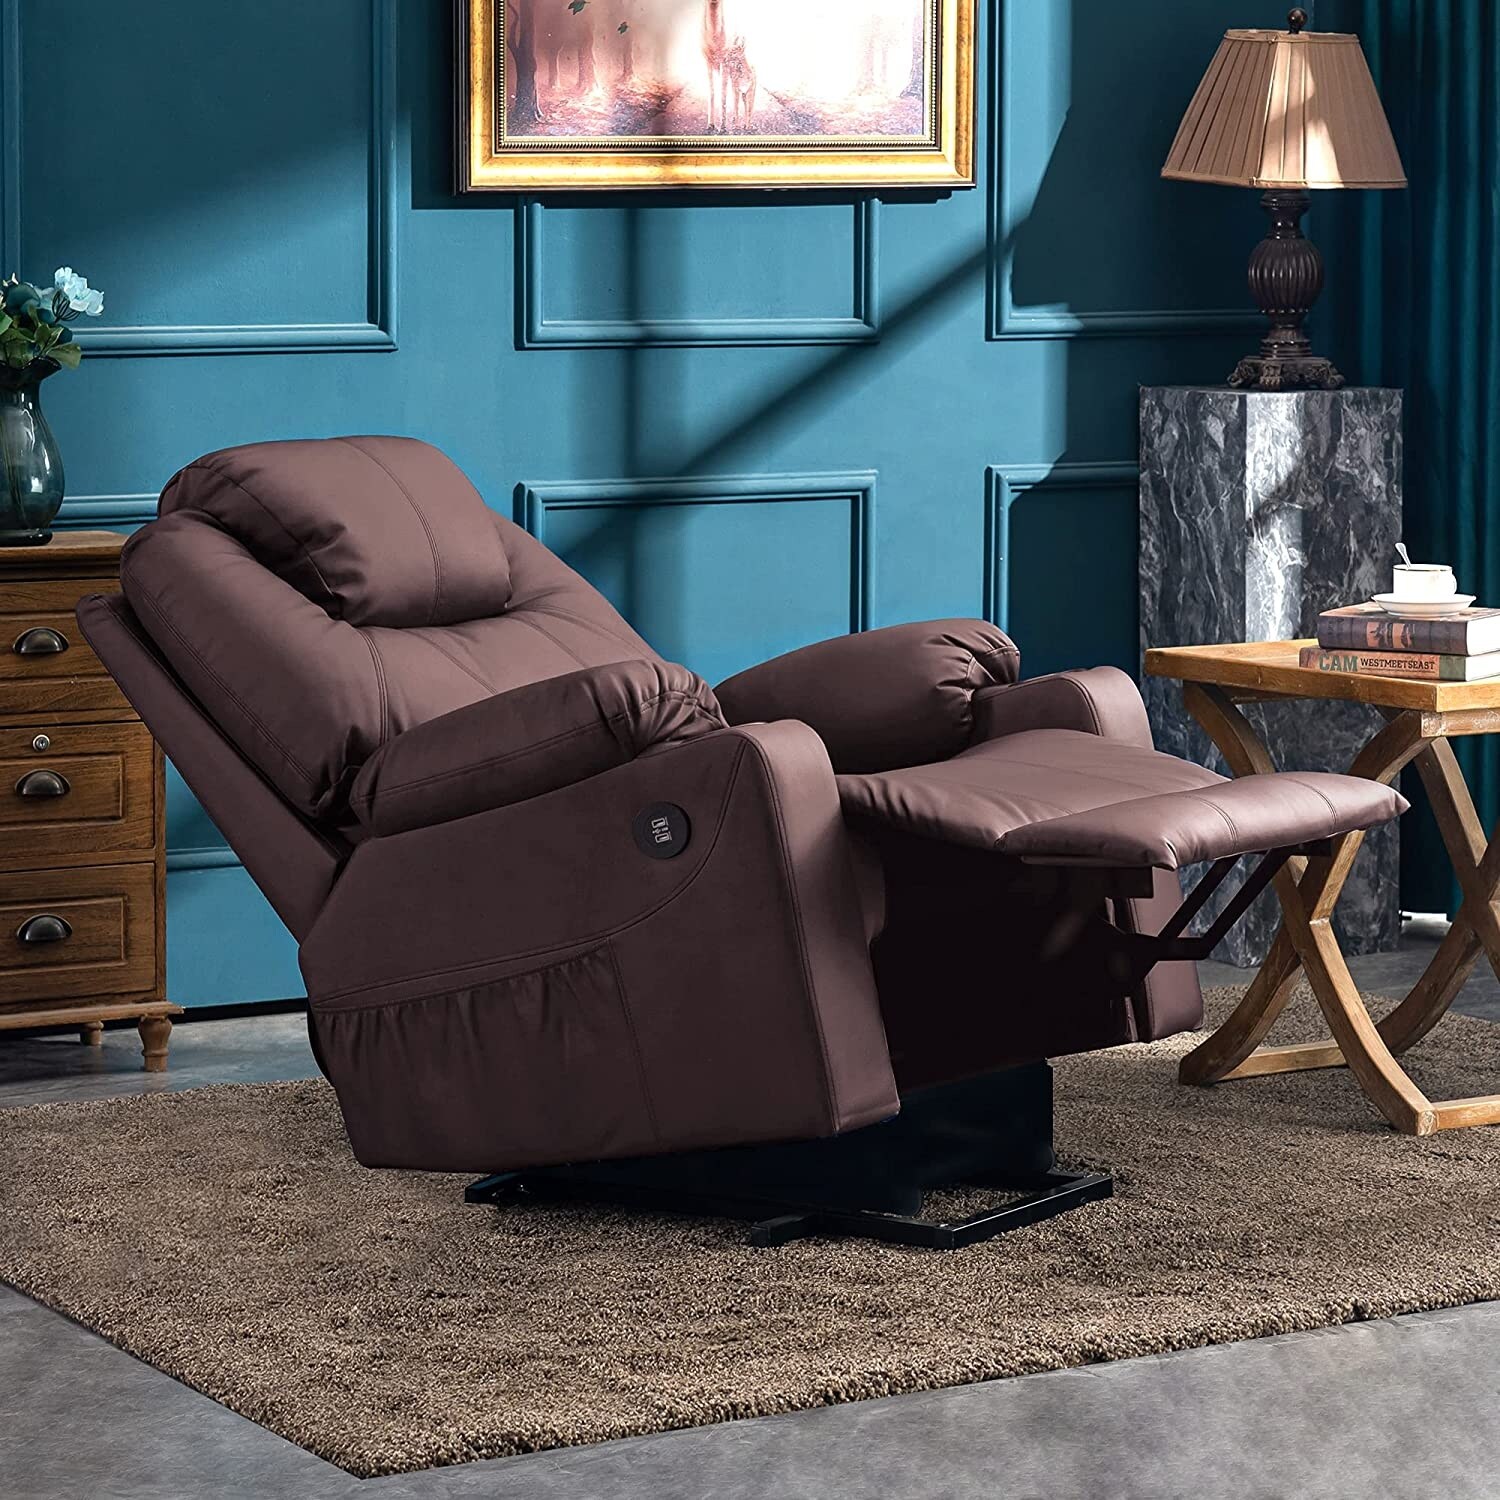 Mcombo Electric Power Lift Recliner Chair Sofa, Massage and Heat for Elderly,  Extended Footrest,Cup Holders, USB Ports 7095 - On Sale - Bed Bath & Beyond  - 36195056